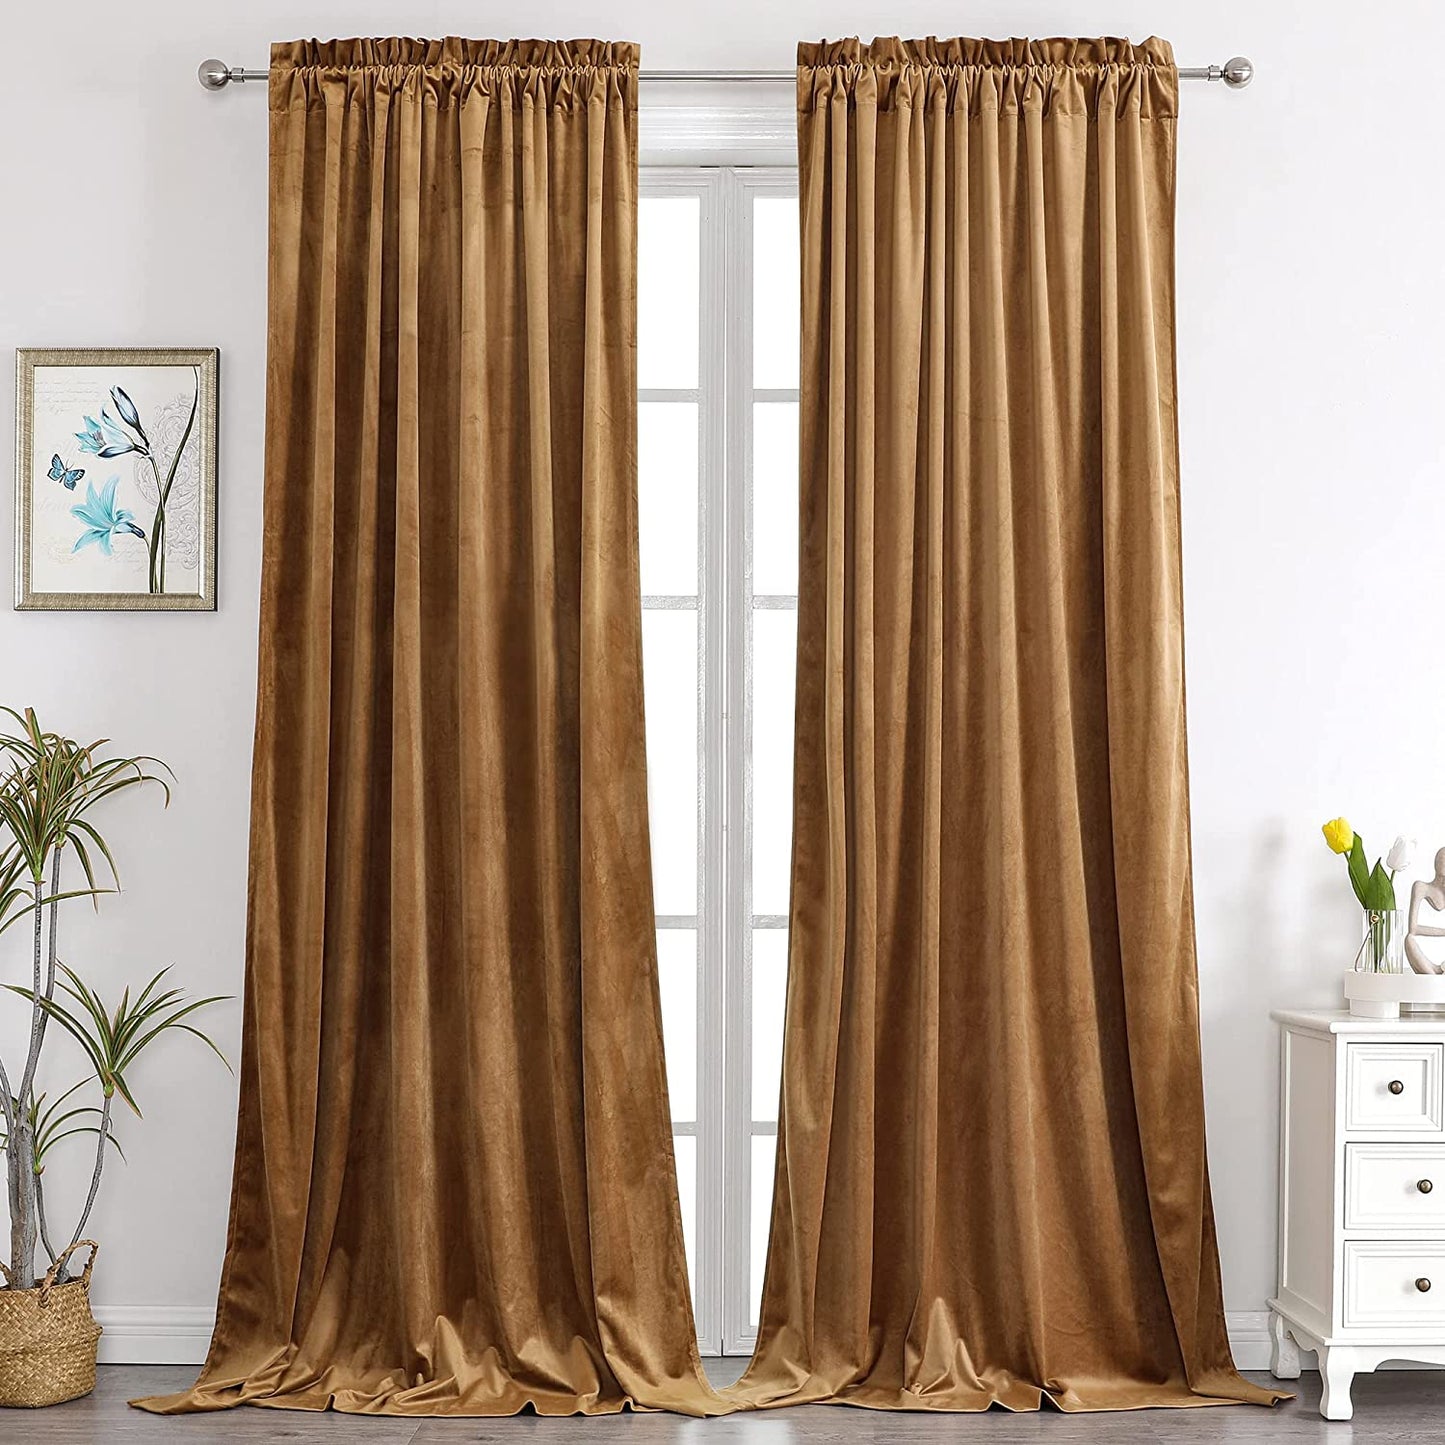 Benedeco Green Velvet Curtains for Bedroom Window, Super Soft Luxury Drapes, Room Darkening Thermal Insulated Rod Pocket Curtain for Living Room, W52 by L84 Inches, 2 Panels  Benedeco Camel W52 * L120 | 2 Panels 